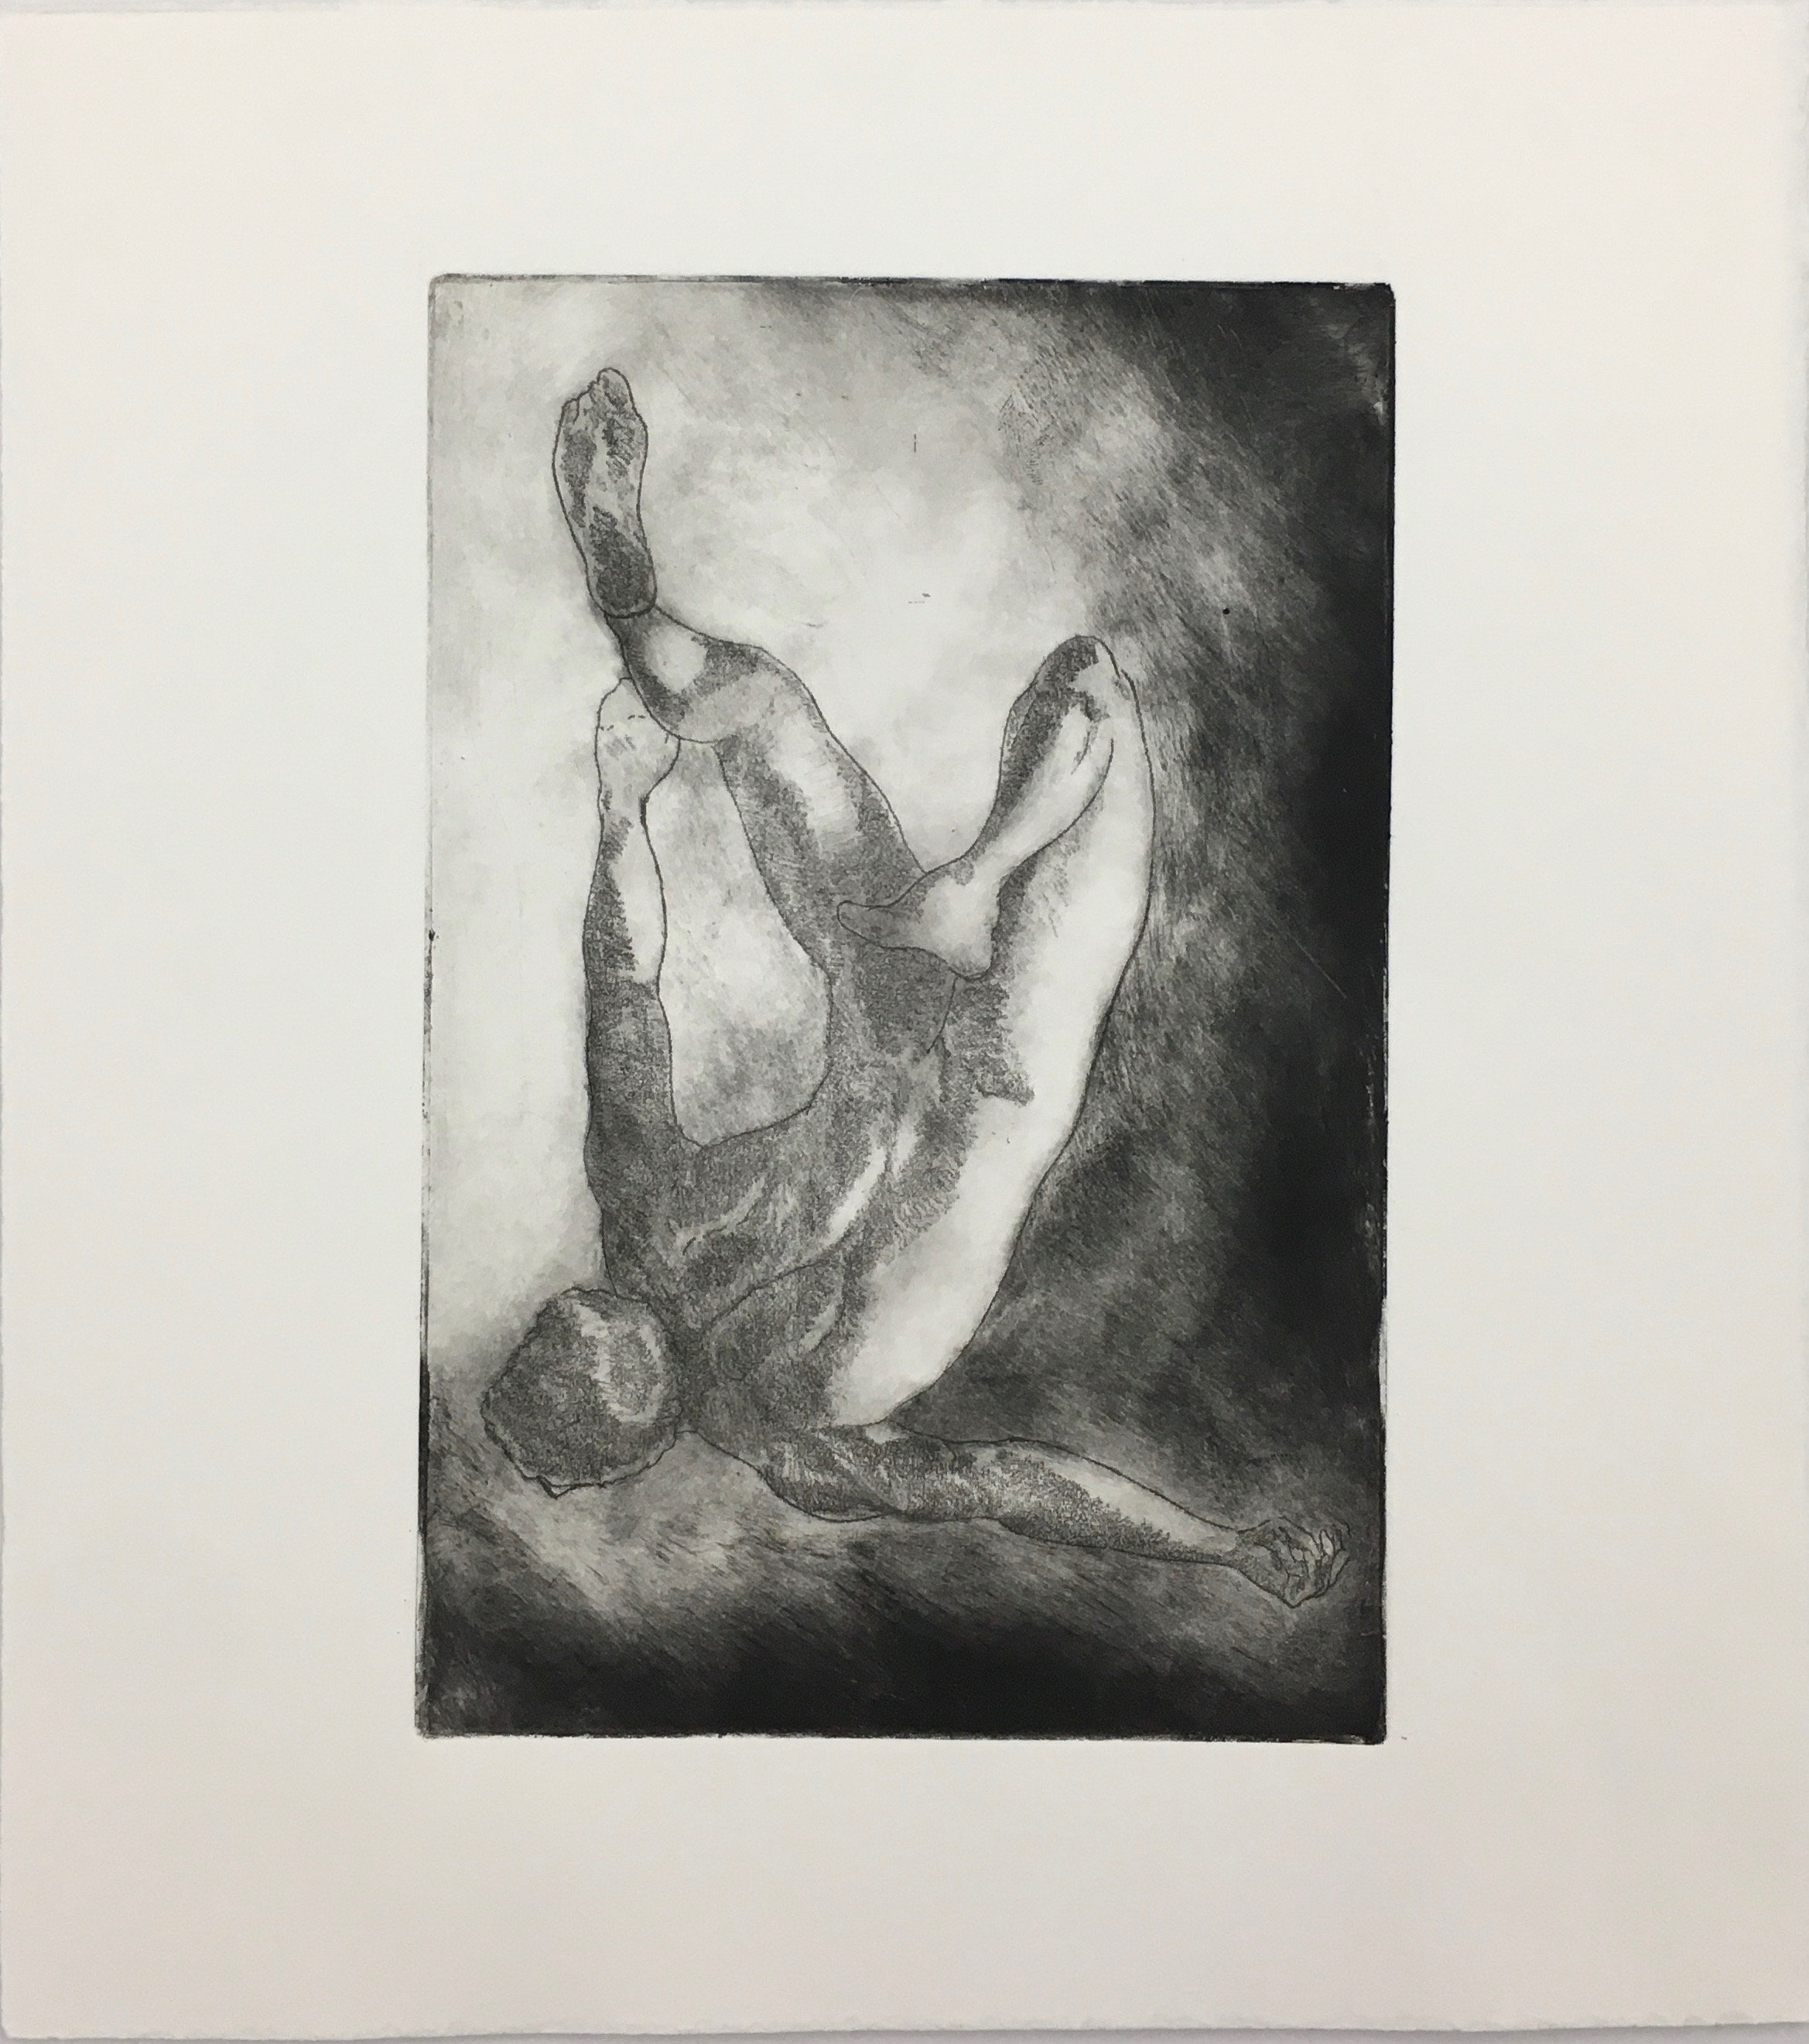 Failed Attempts in the Act of Falling Up: Attempt No. 6, #2, 2019.
                Monoprint on top of etching on soft ground, 9” x 6” by Karl Daum